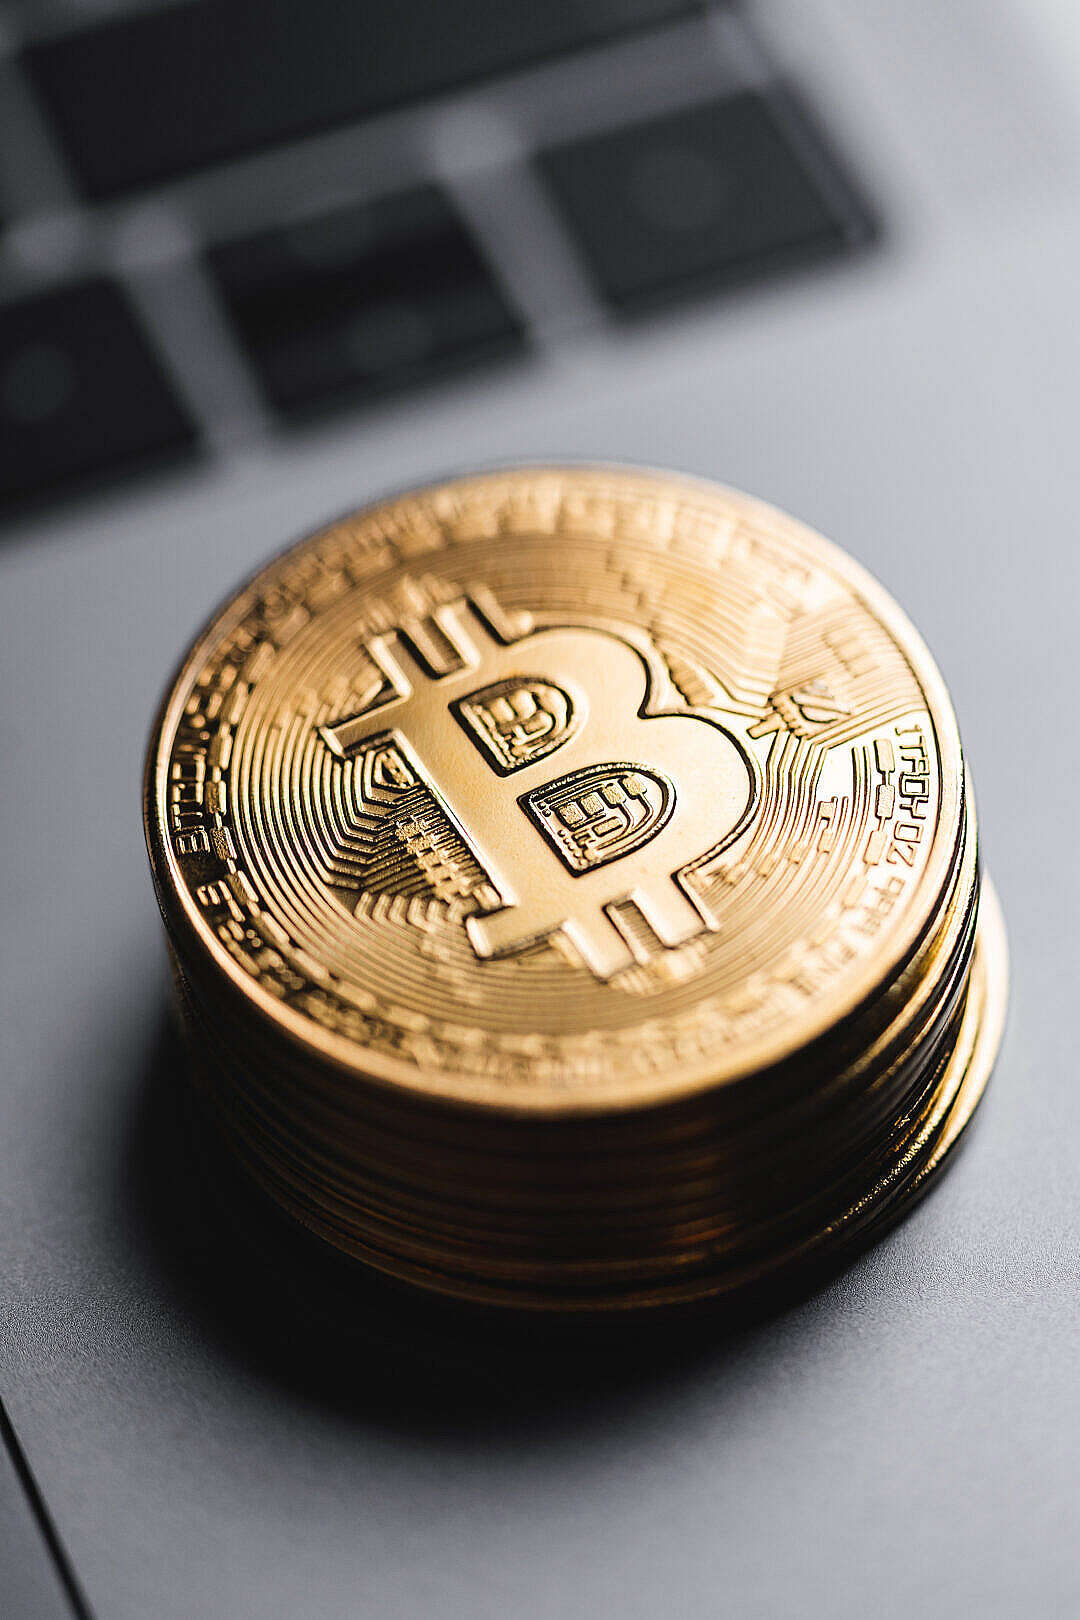 Download Pile of Bitcoins Lying on The Laptop Close Up FREE Stock Photo